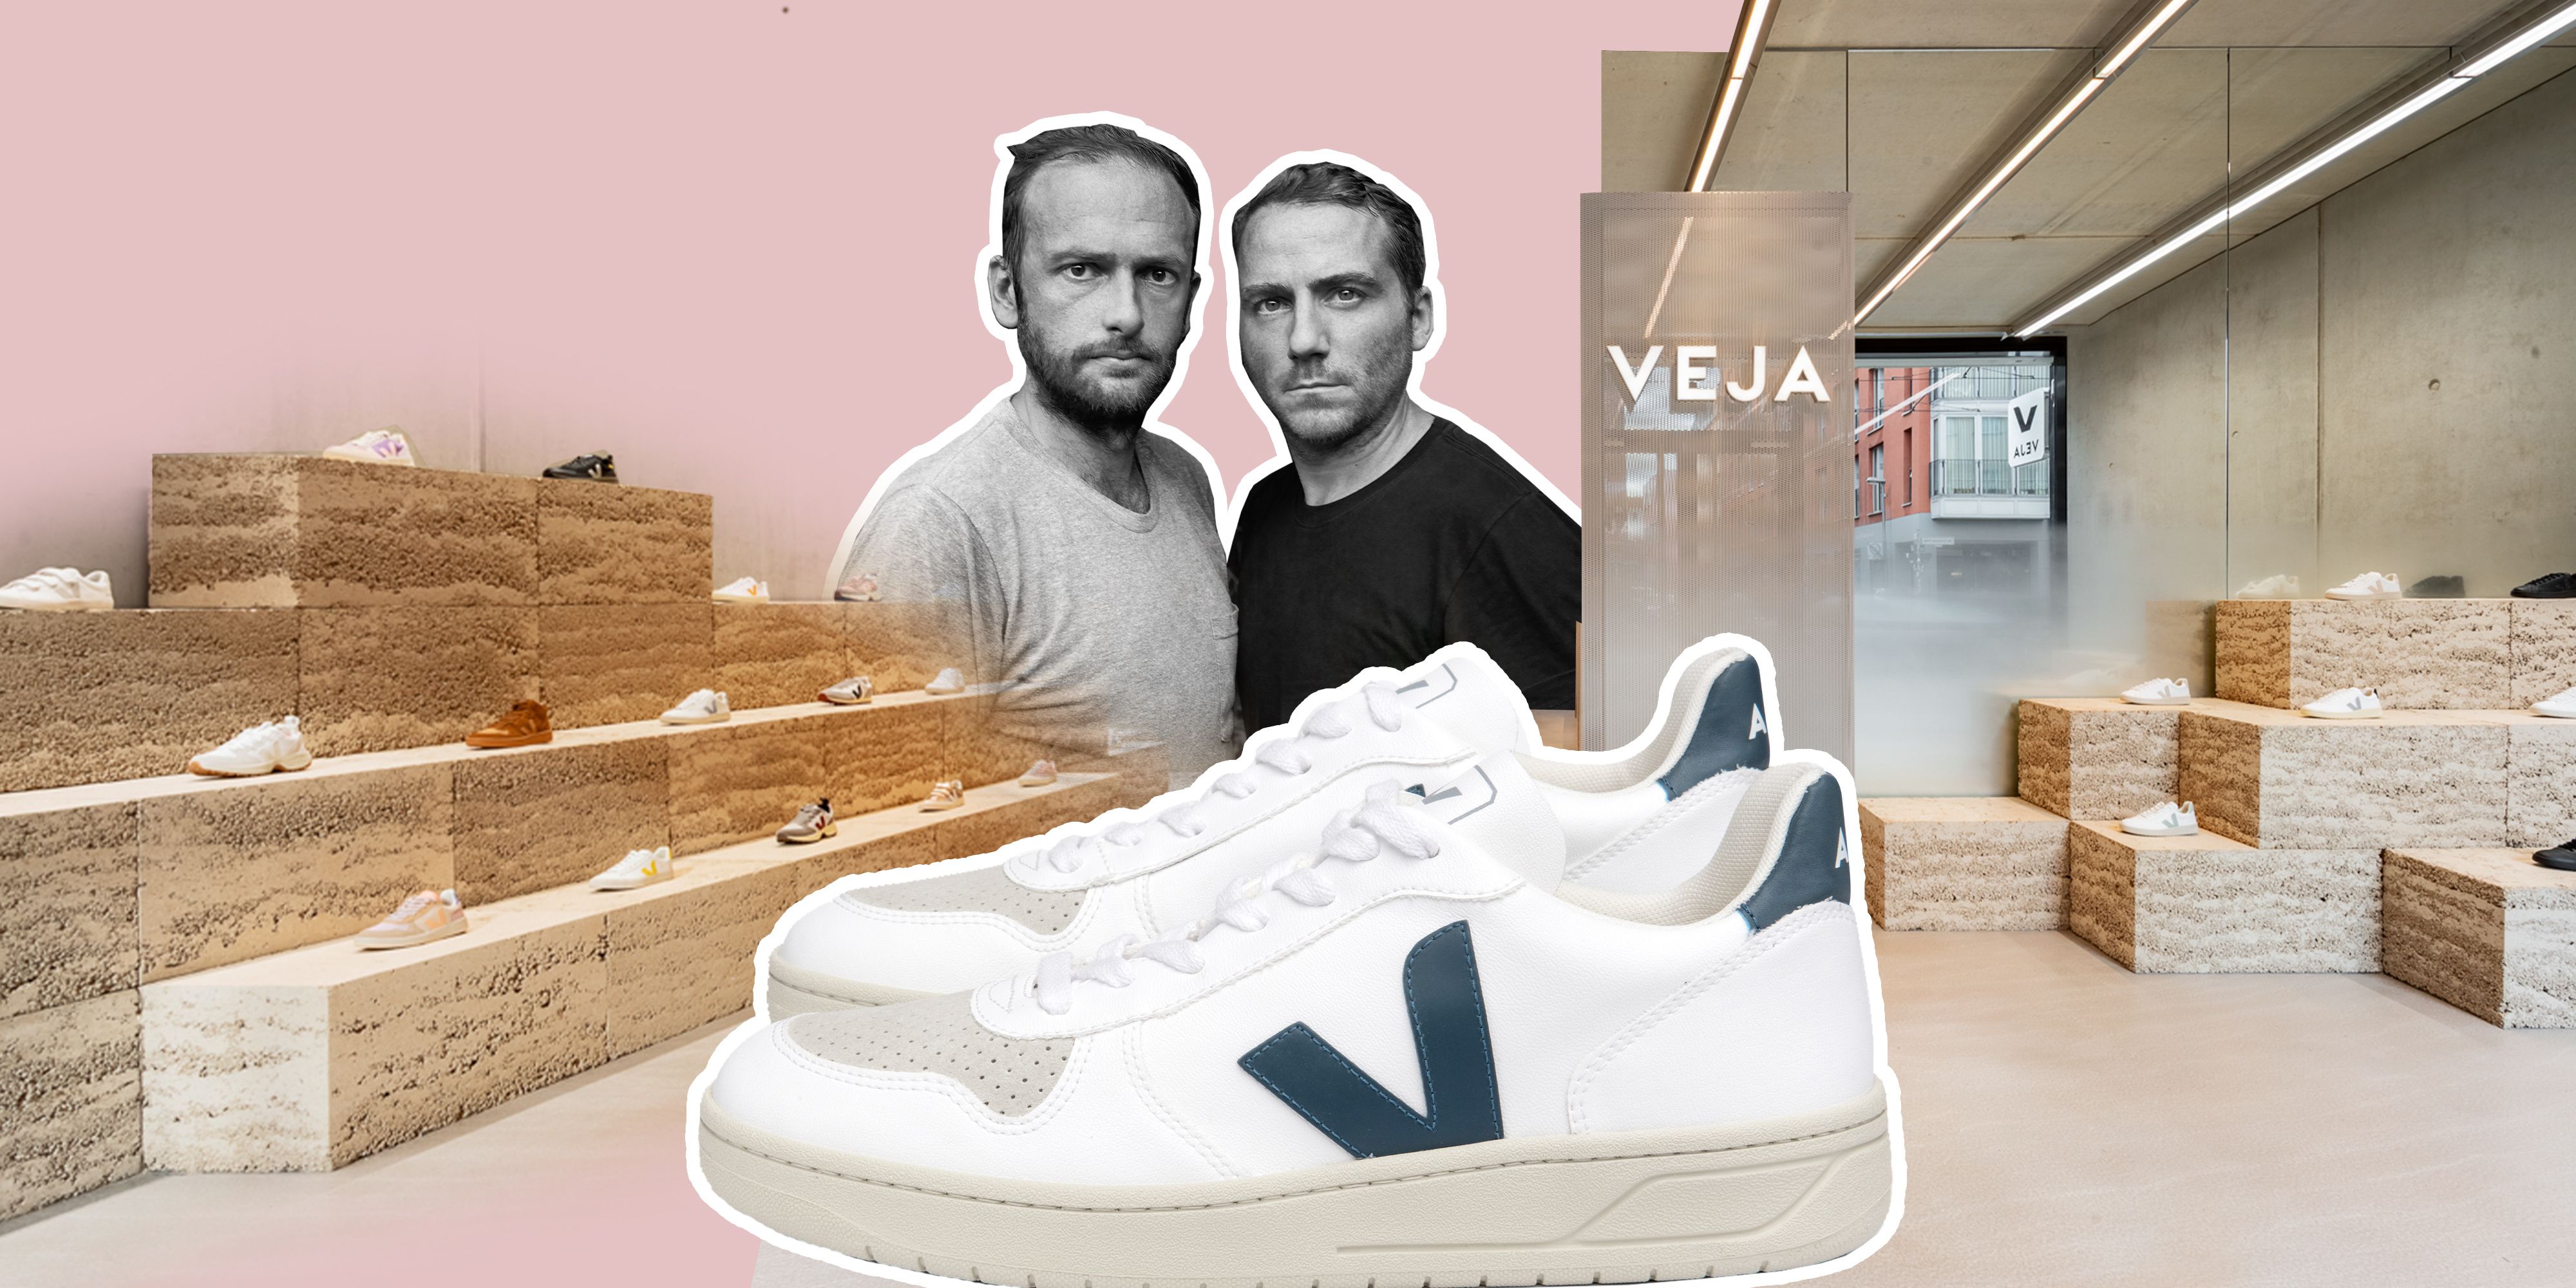 Consumer insights on sneaker shopping and sneakerheads | aytm